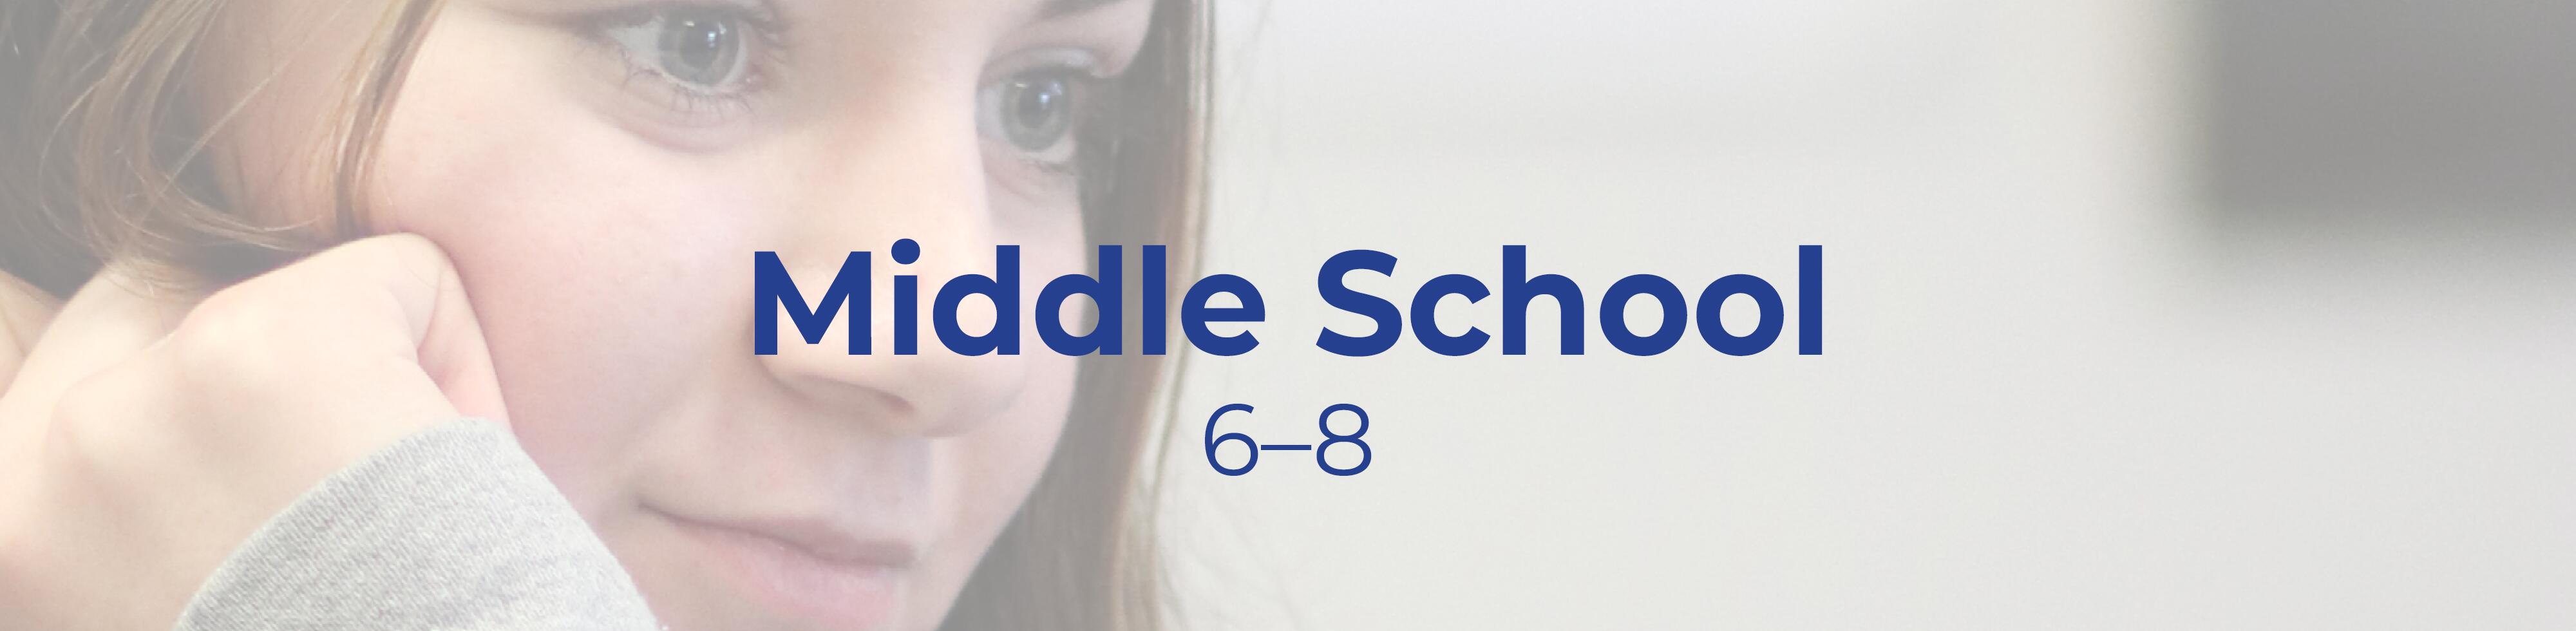 Text that reads "Middle School 6-8" overlaid on a picture of a student working